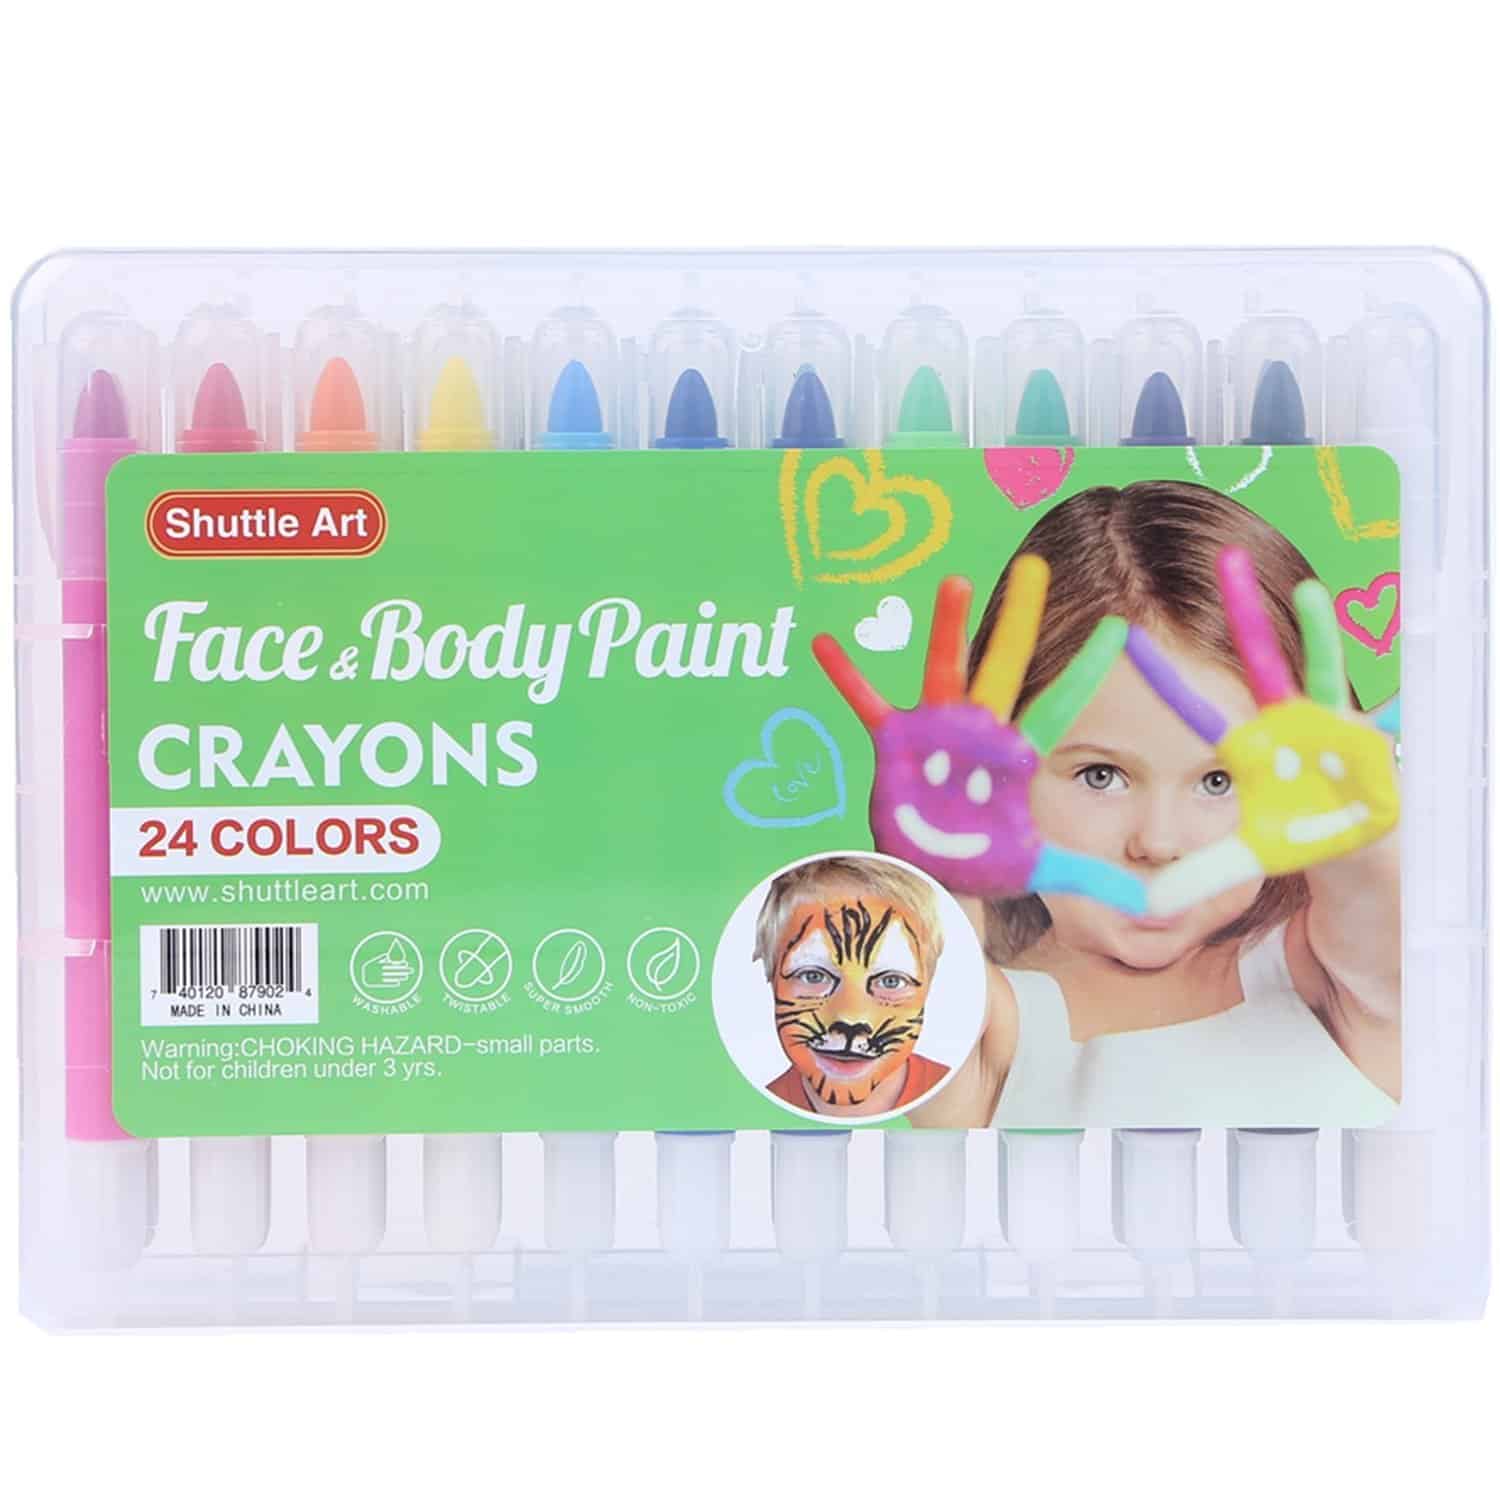 DEAL ALERT: Face and Body Paint Crayons – 24 Colors Kit for Kids – 80% off!